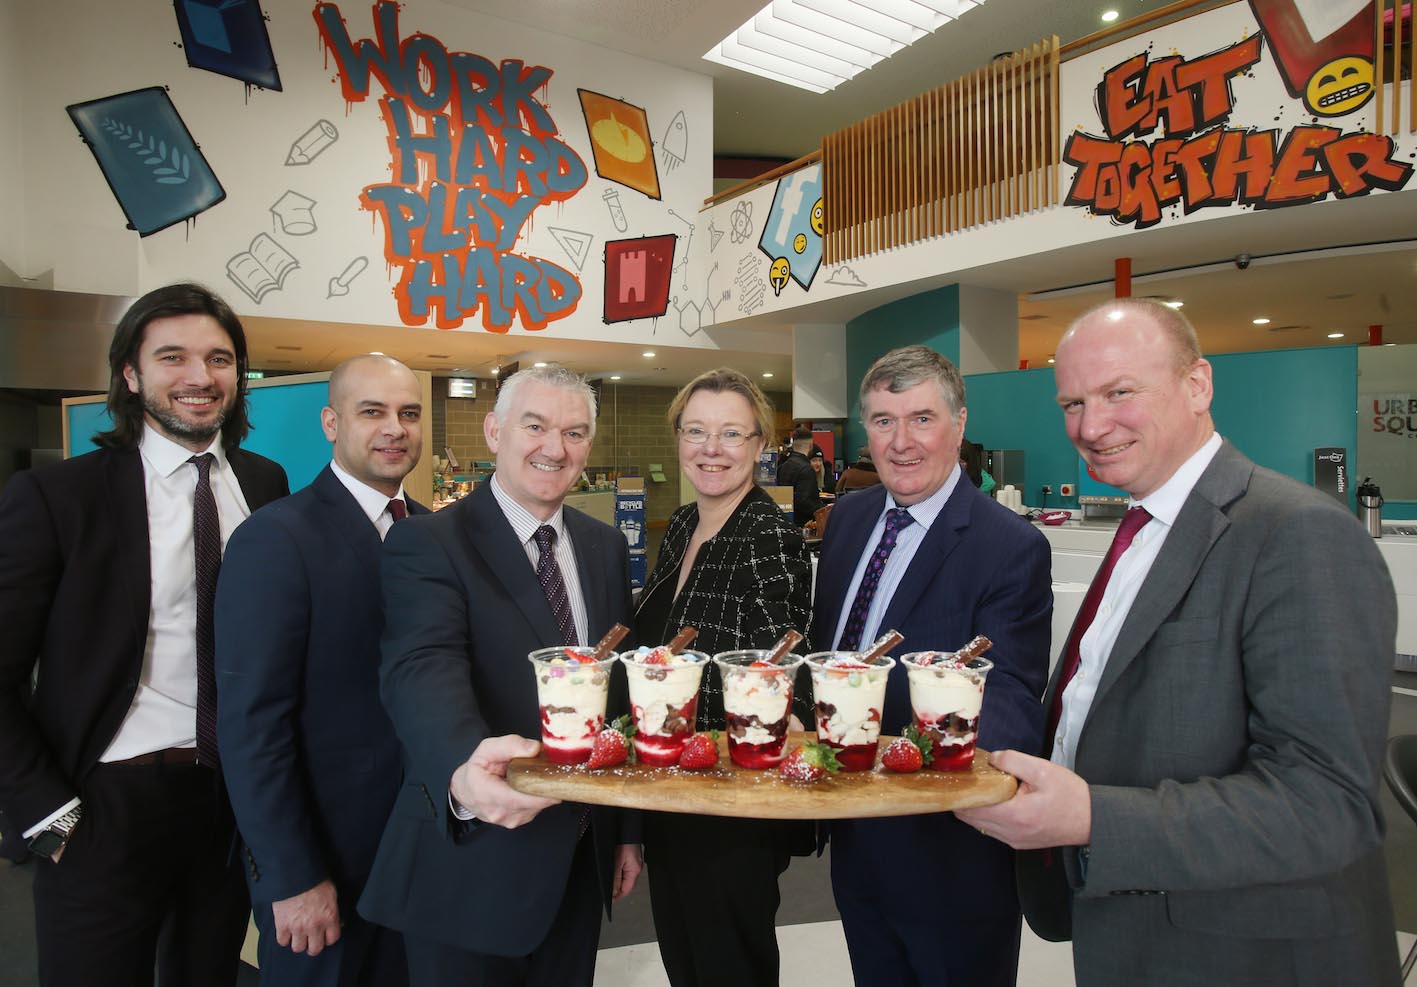 Mount Charles wins major education contract at Maynooth University